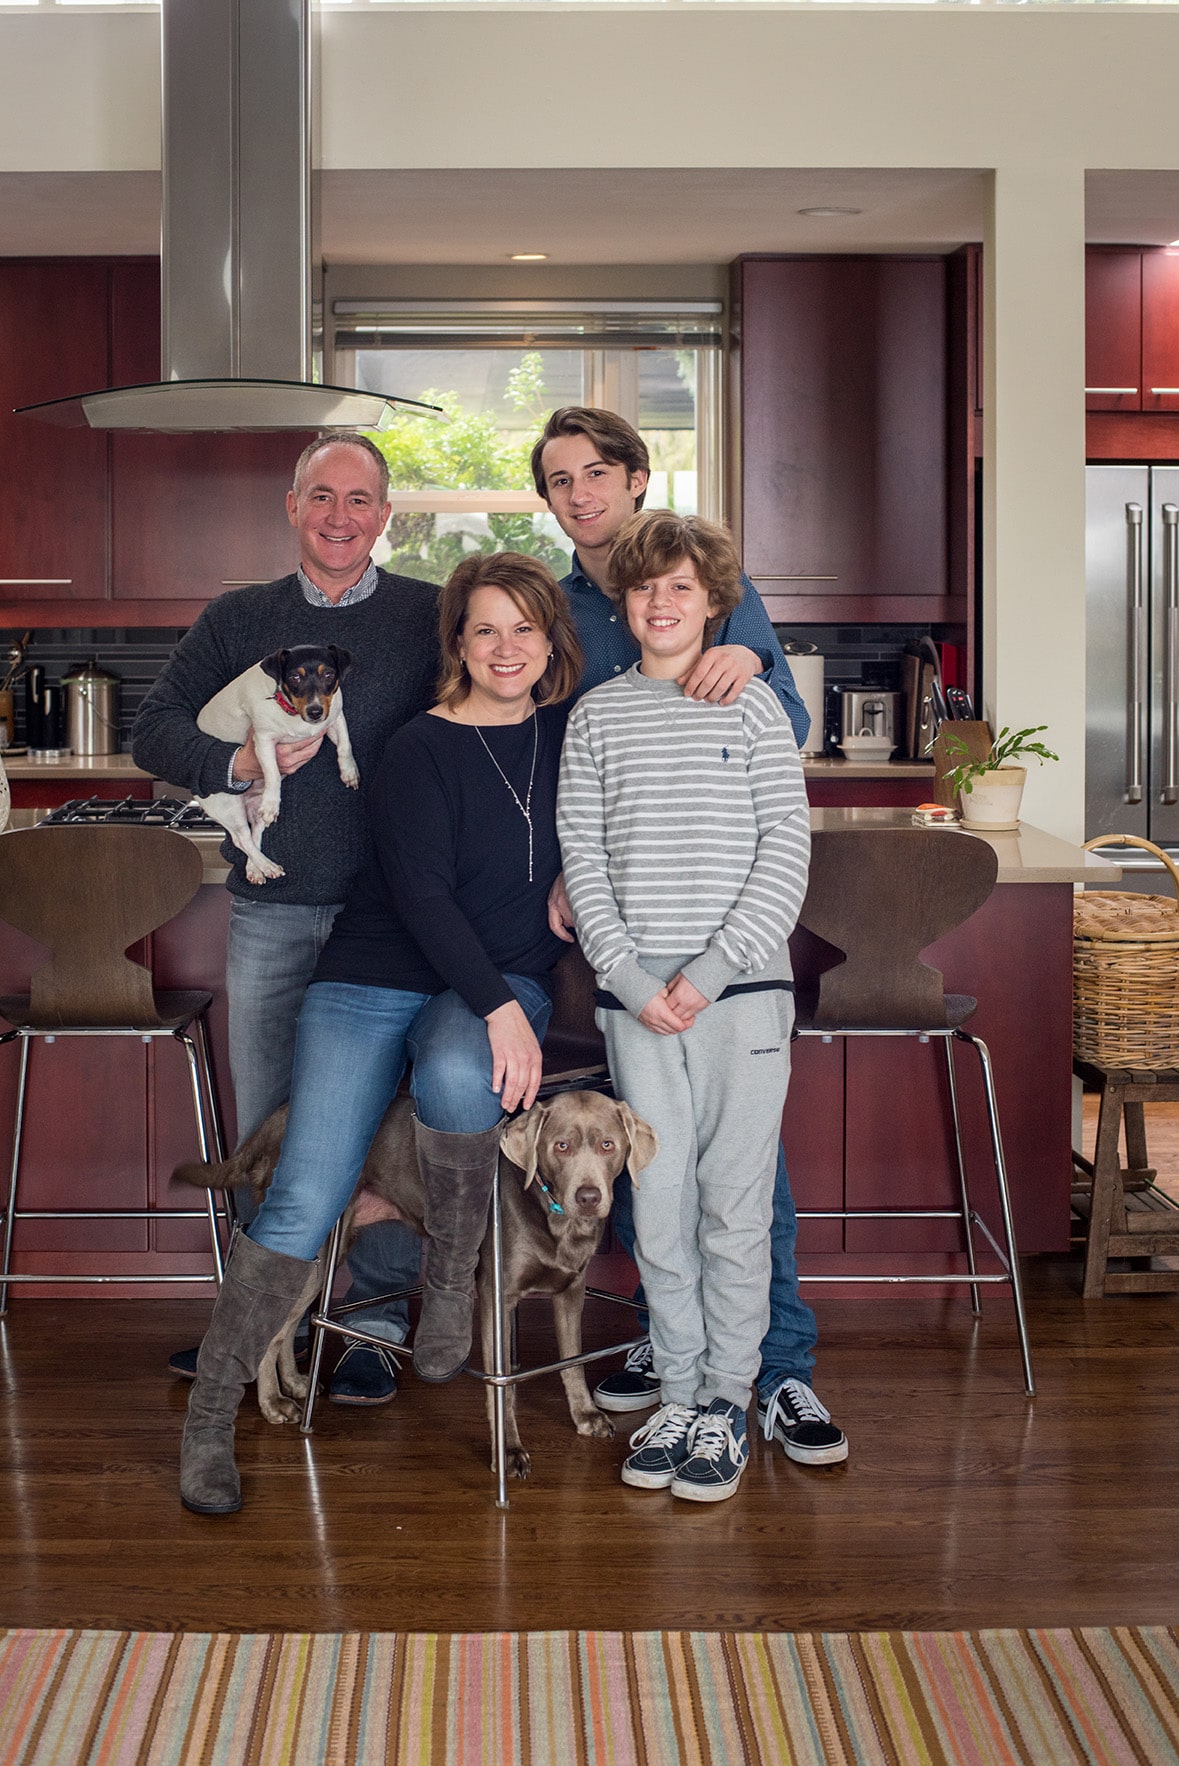 family portrait of a mom, dad, and two sons with their two dogs in the kitchen